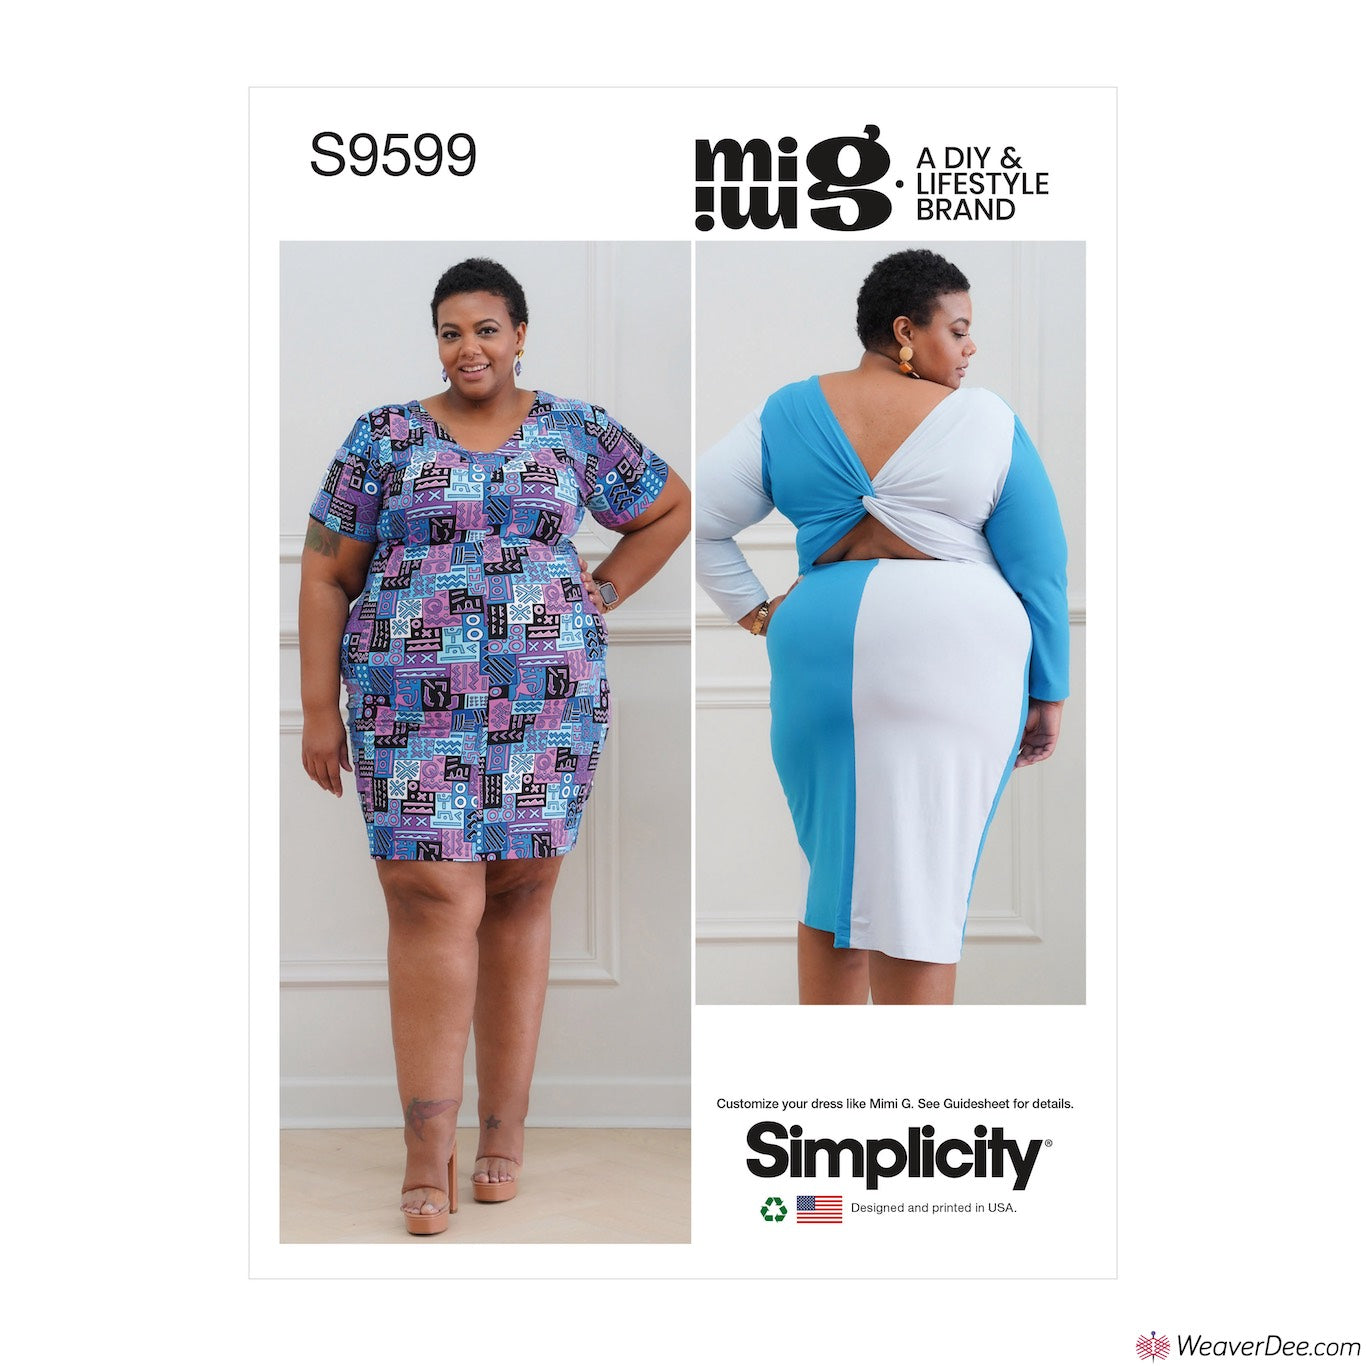 Simplicity Pattern S9502 Misses' & Women's Costumes